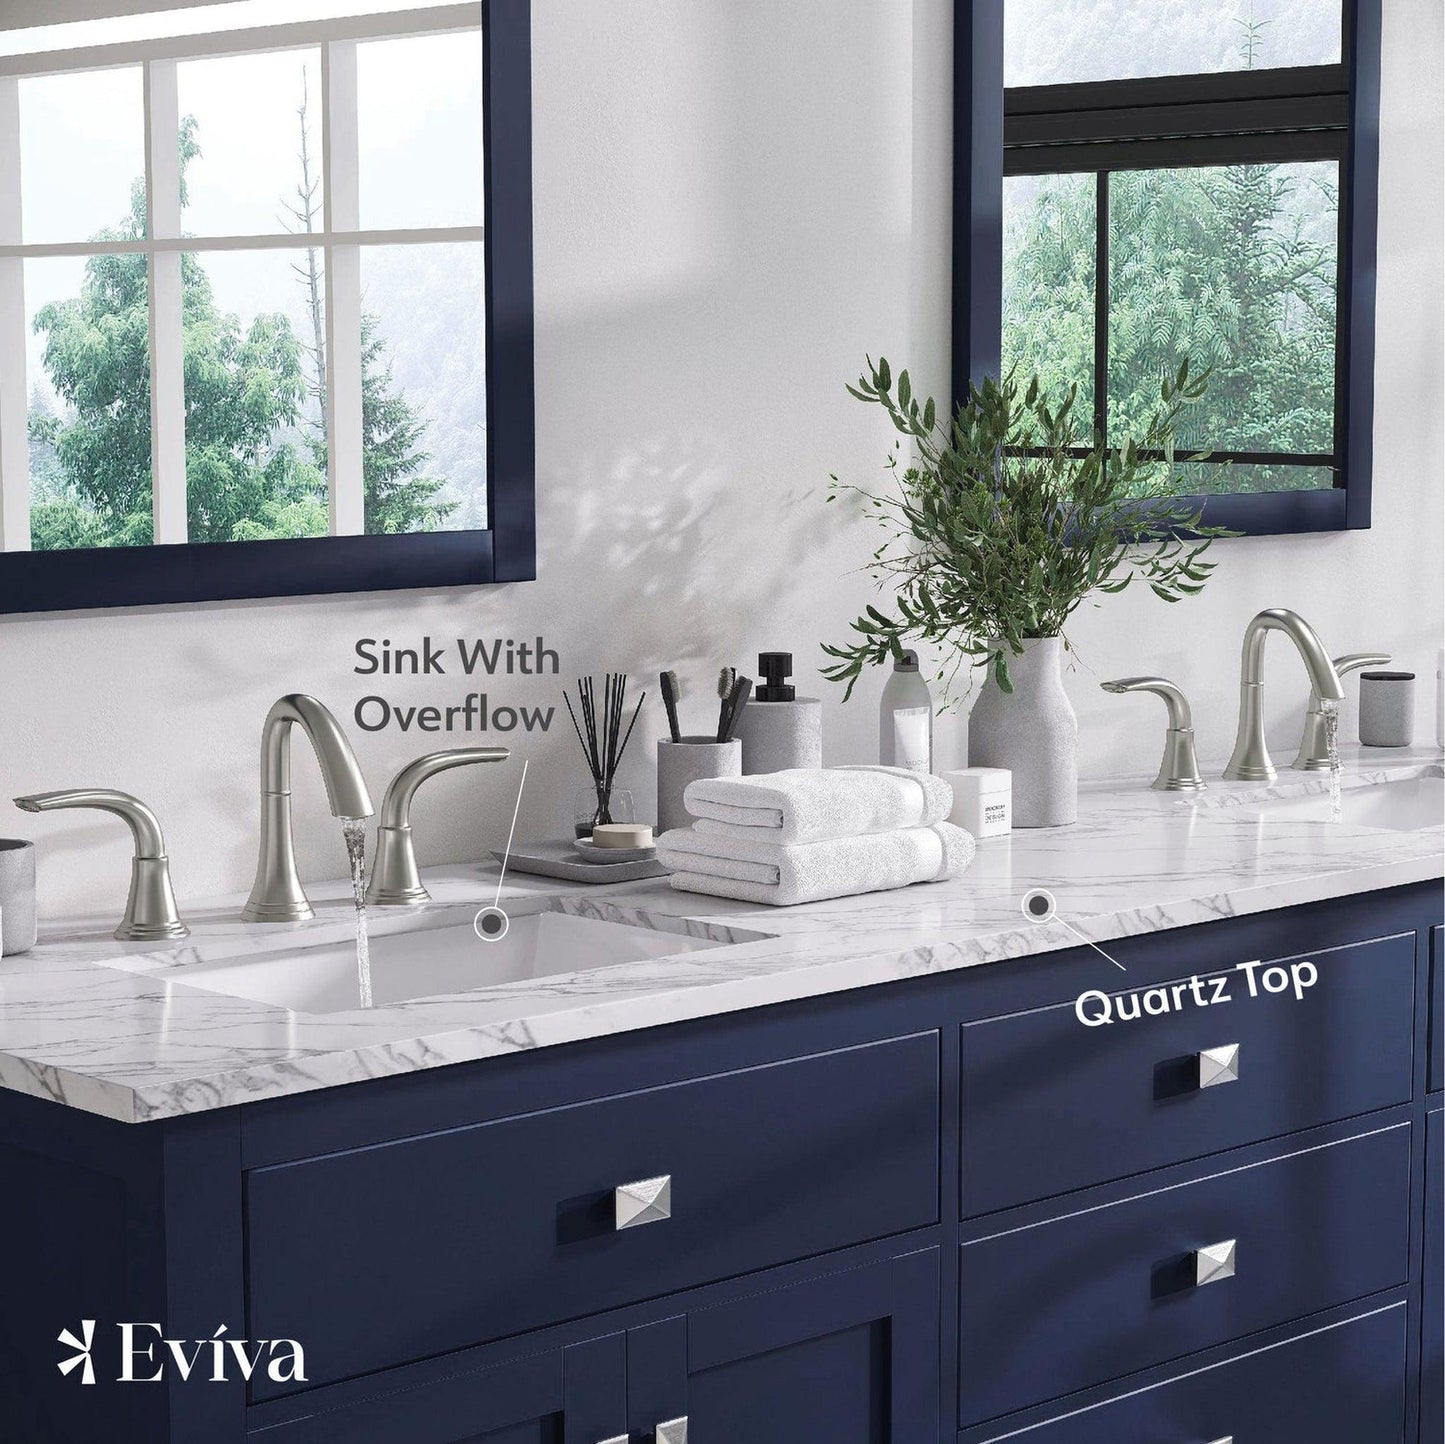 Eviva Totti Artemis 72" x 34" Blue Freestanding Bathroom Vanity With Carrara Style Man-made Stone Countertop and Double Undermount Sink